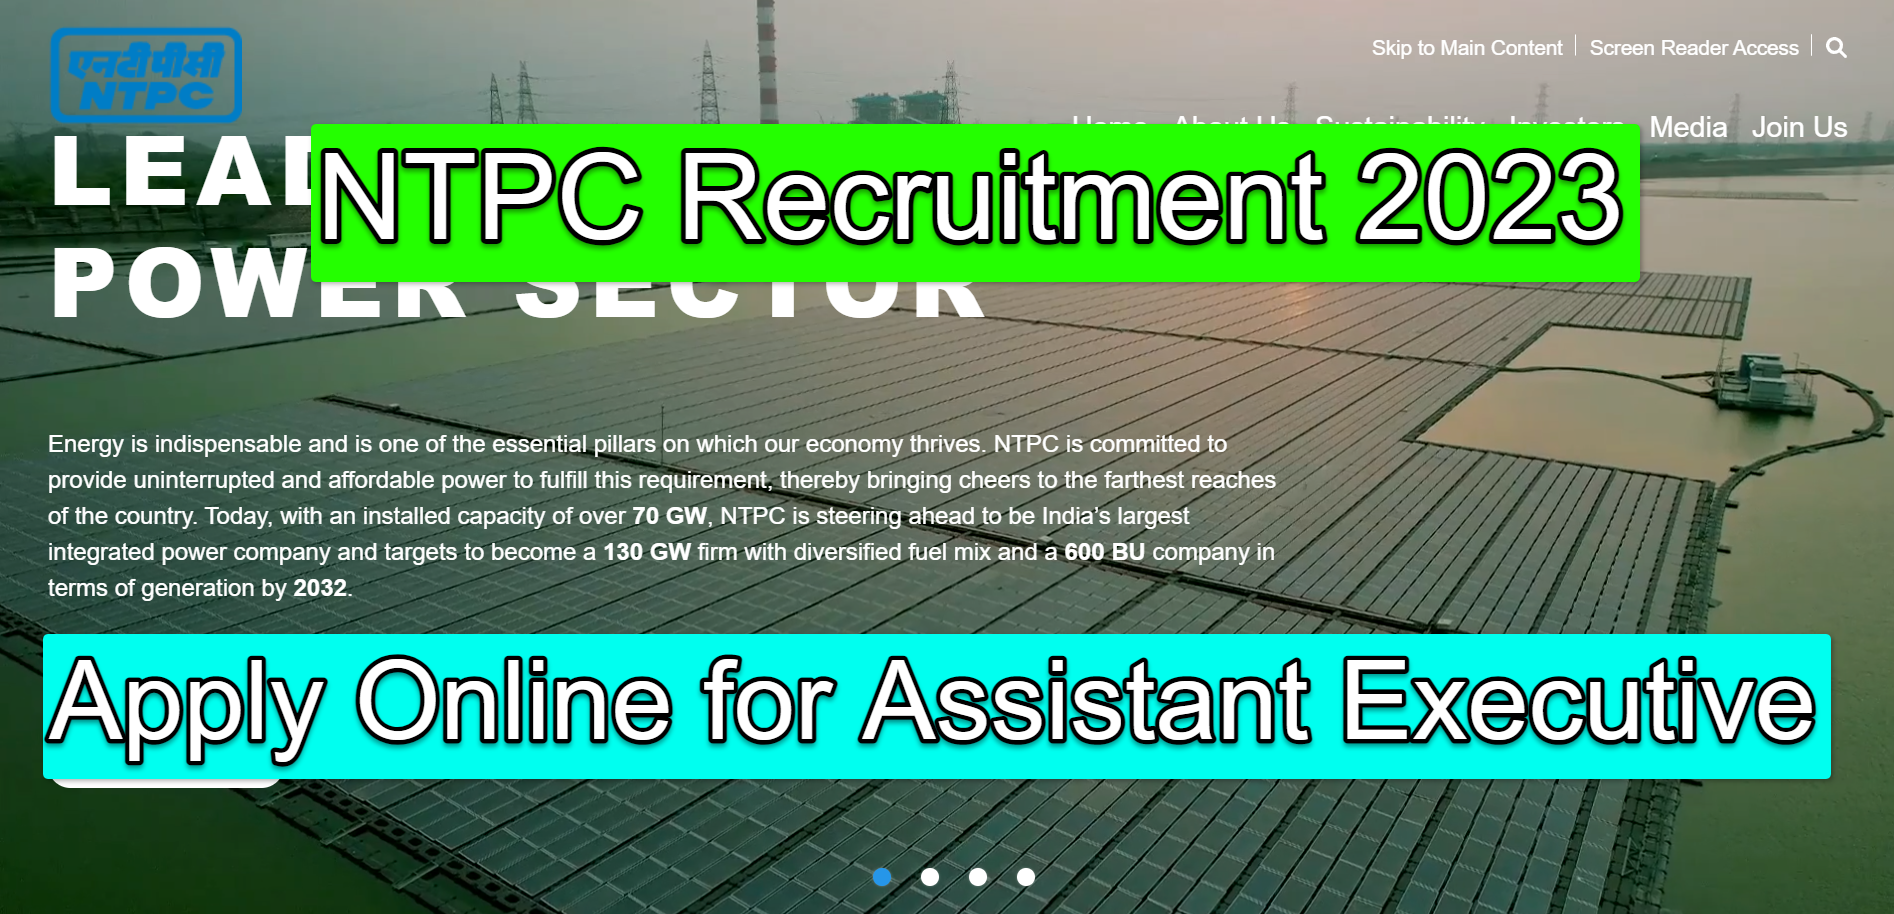 NTPC Recruitment 2023 : Apply Online for Assistant Executive